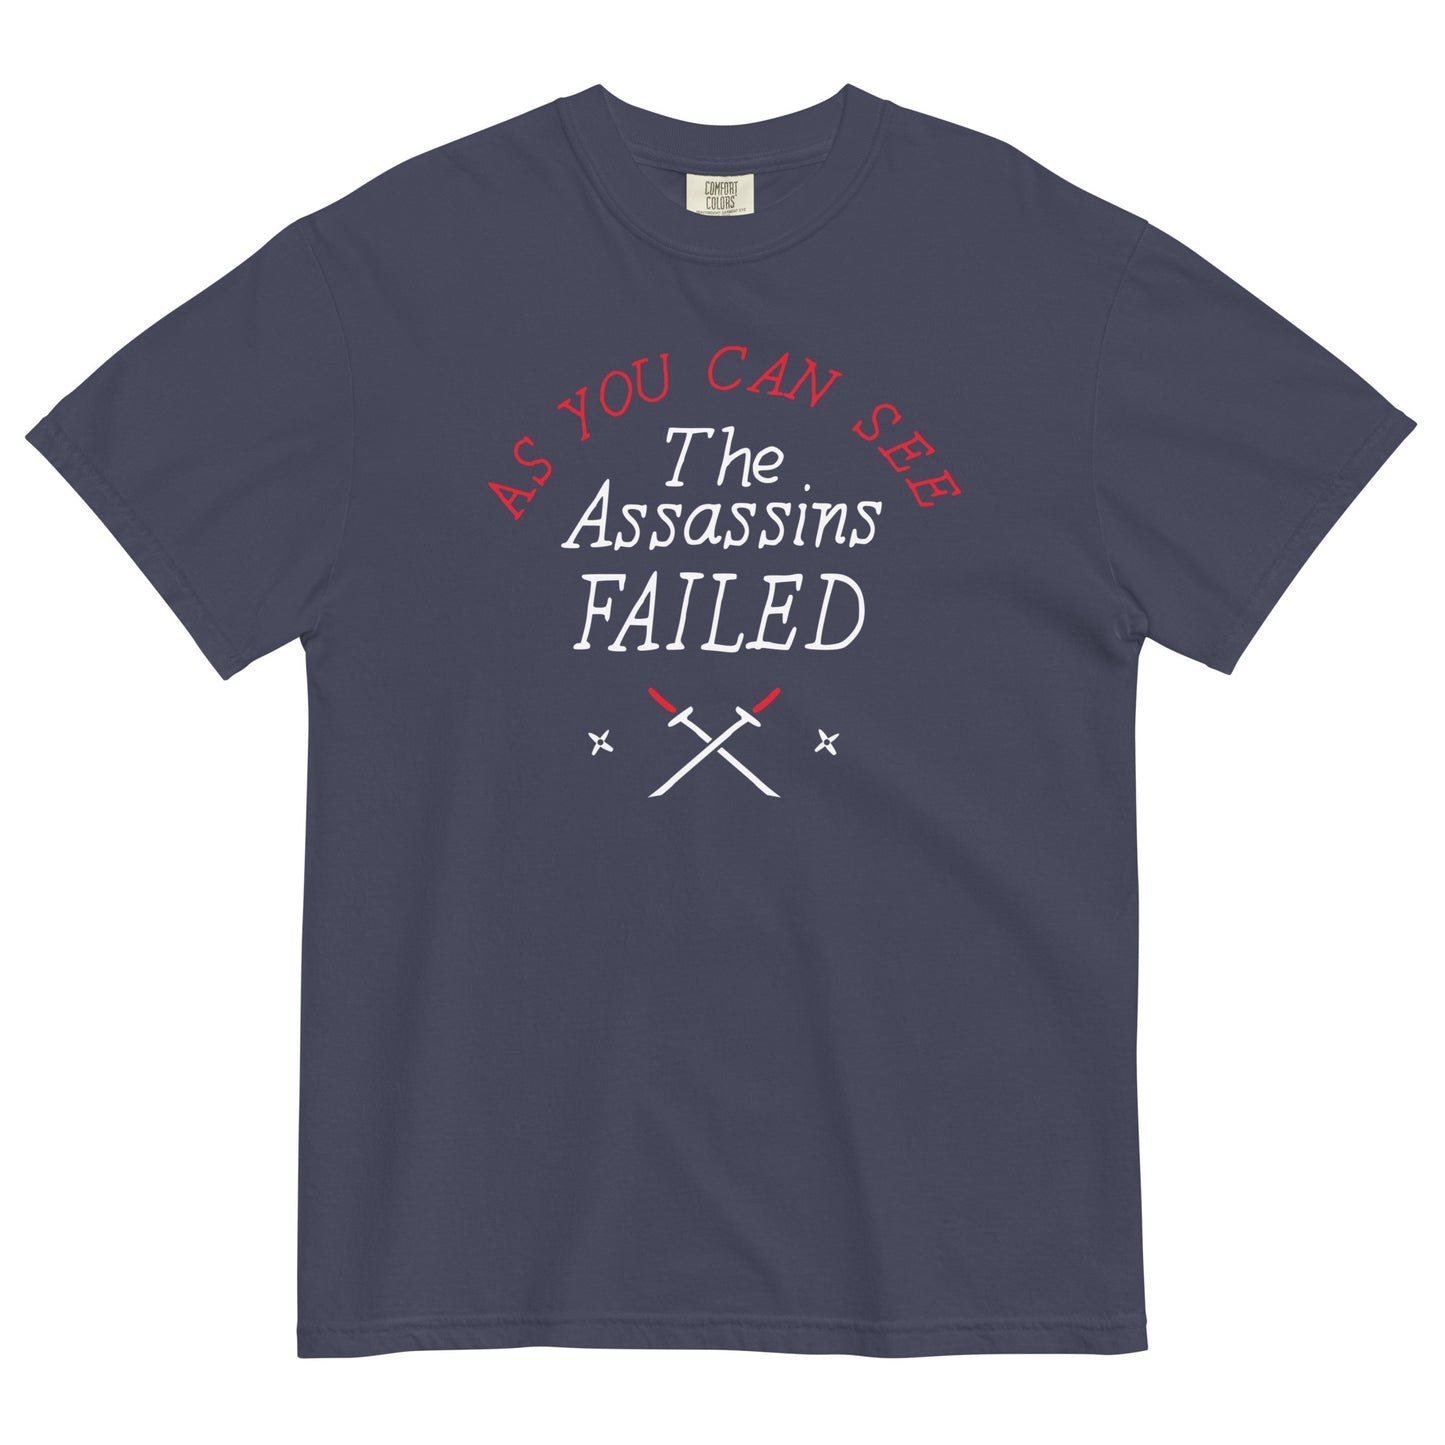 The Assassins Failed Men's Relaxed Fit Tee